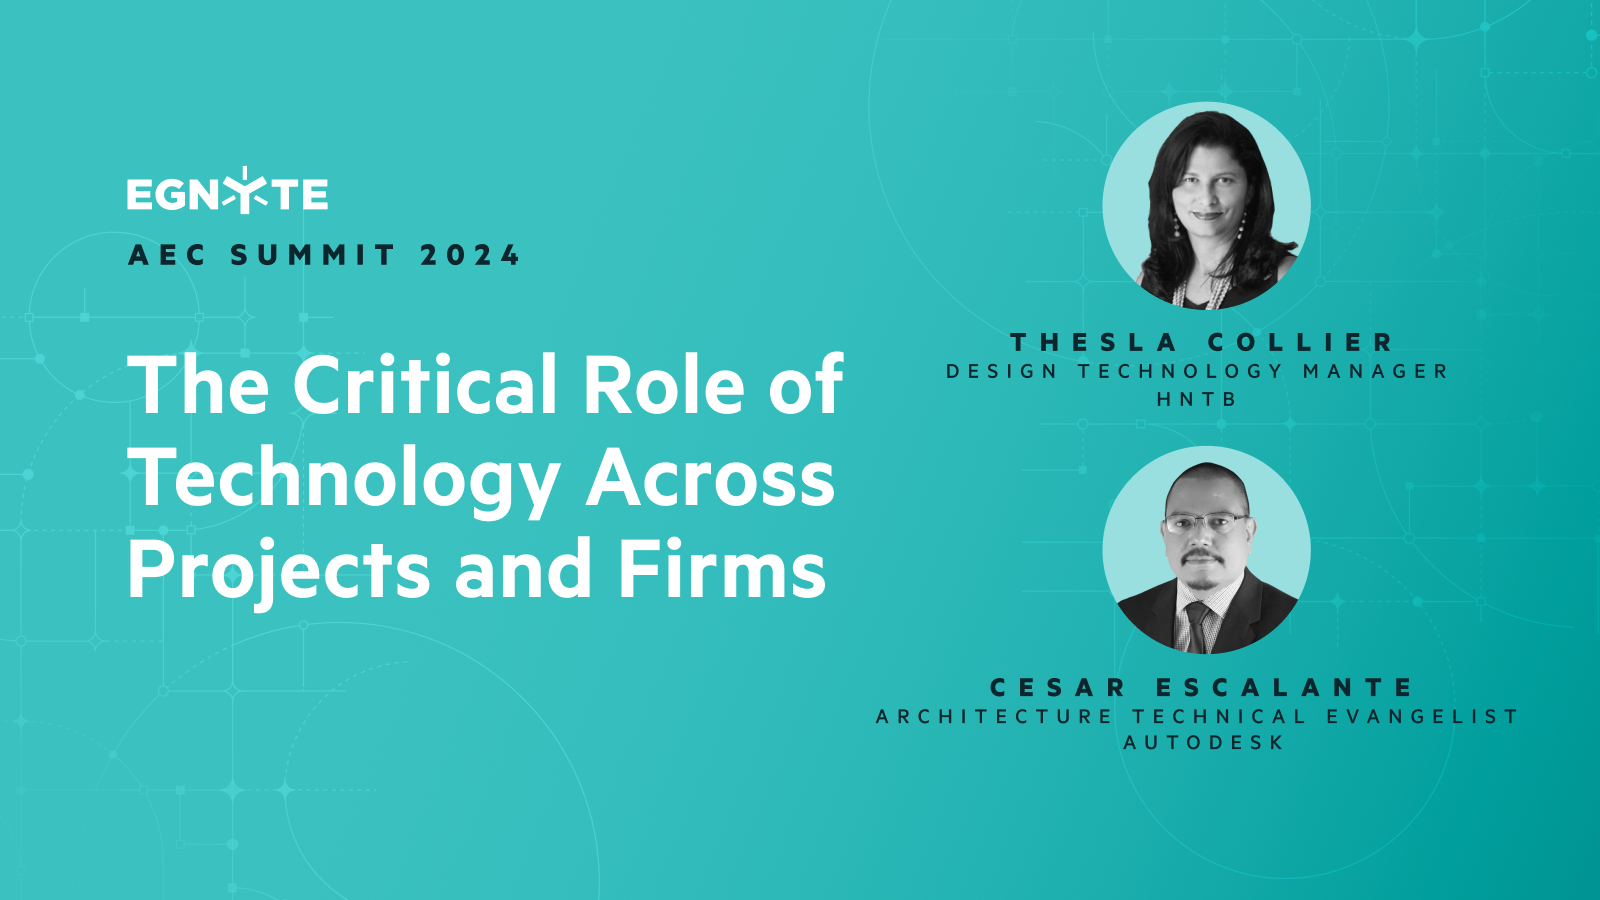 The Critical Role of Technology Across Projects and Firms